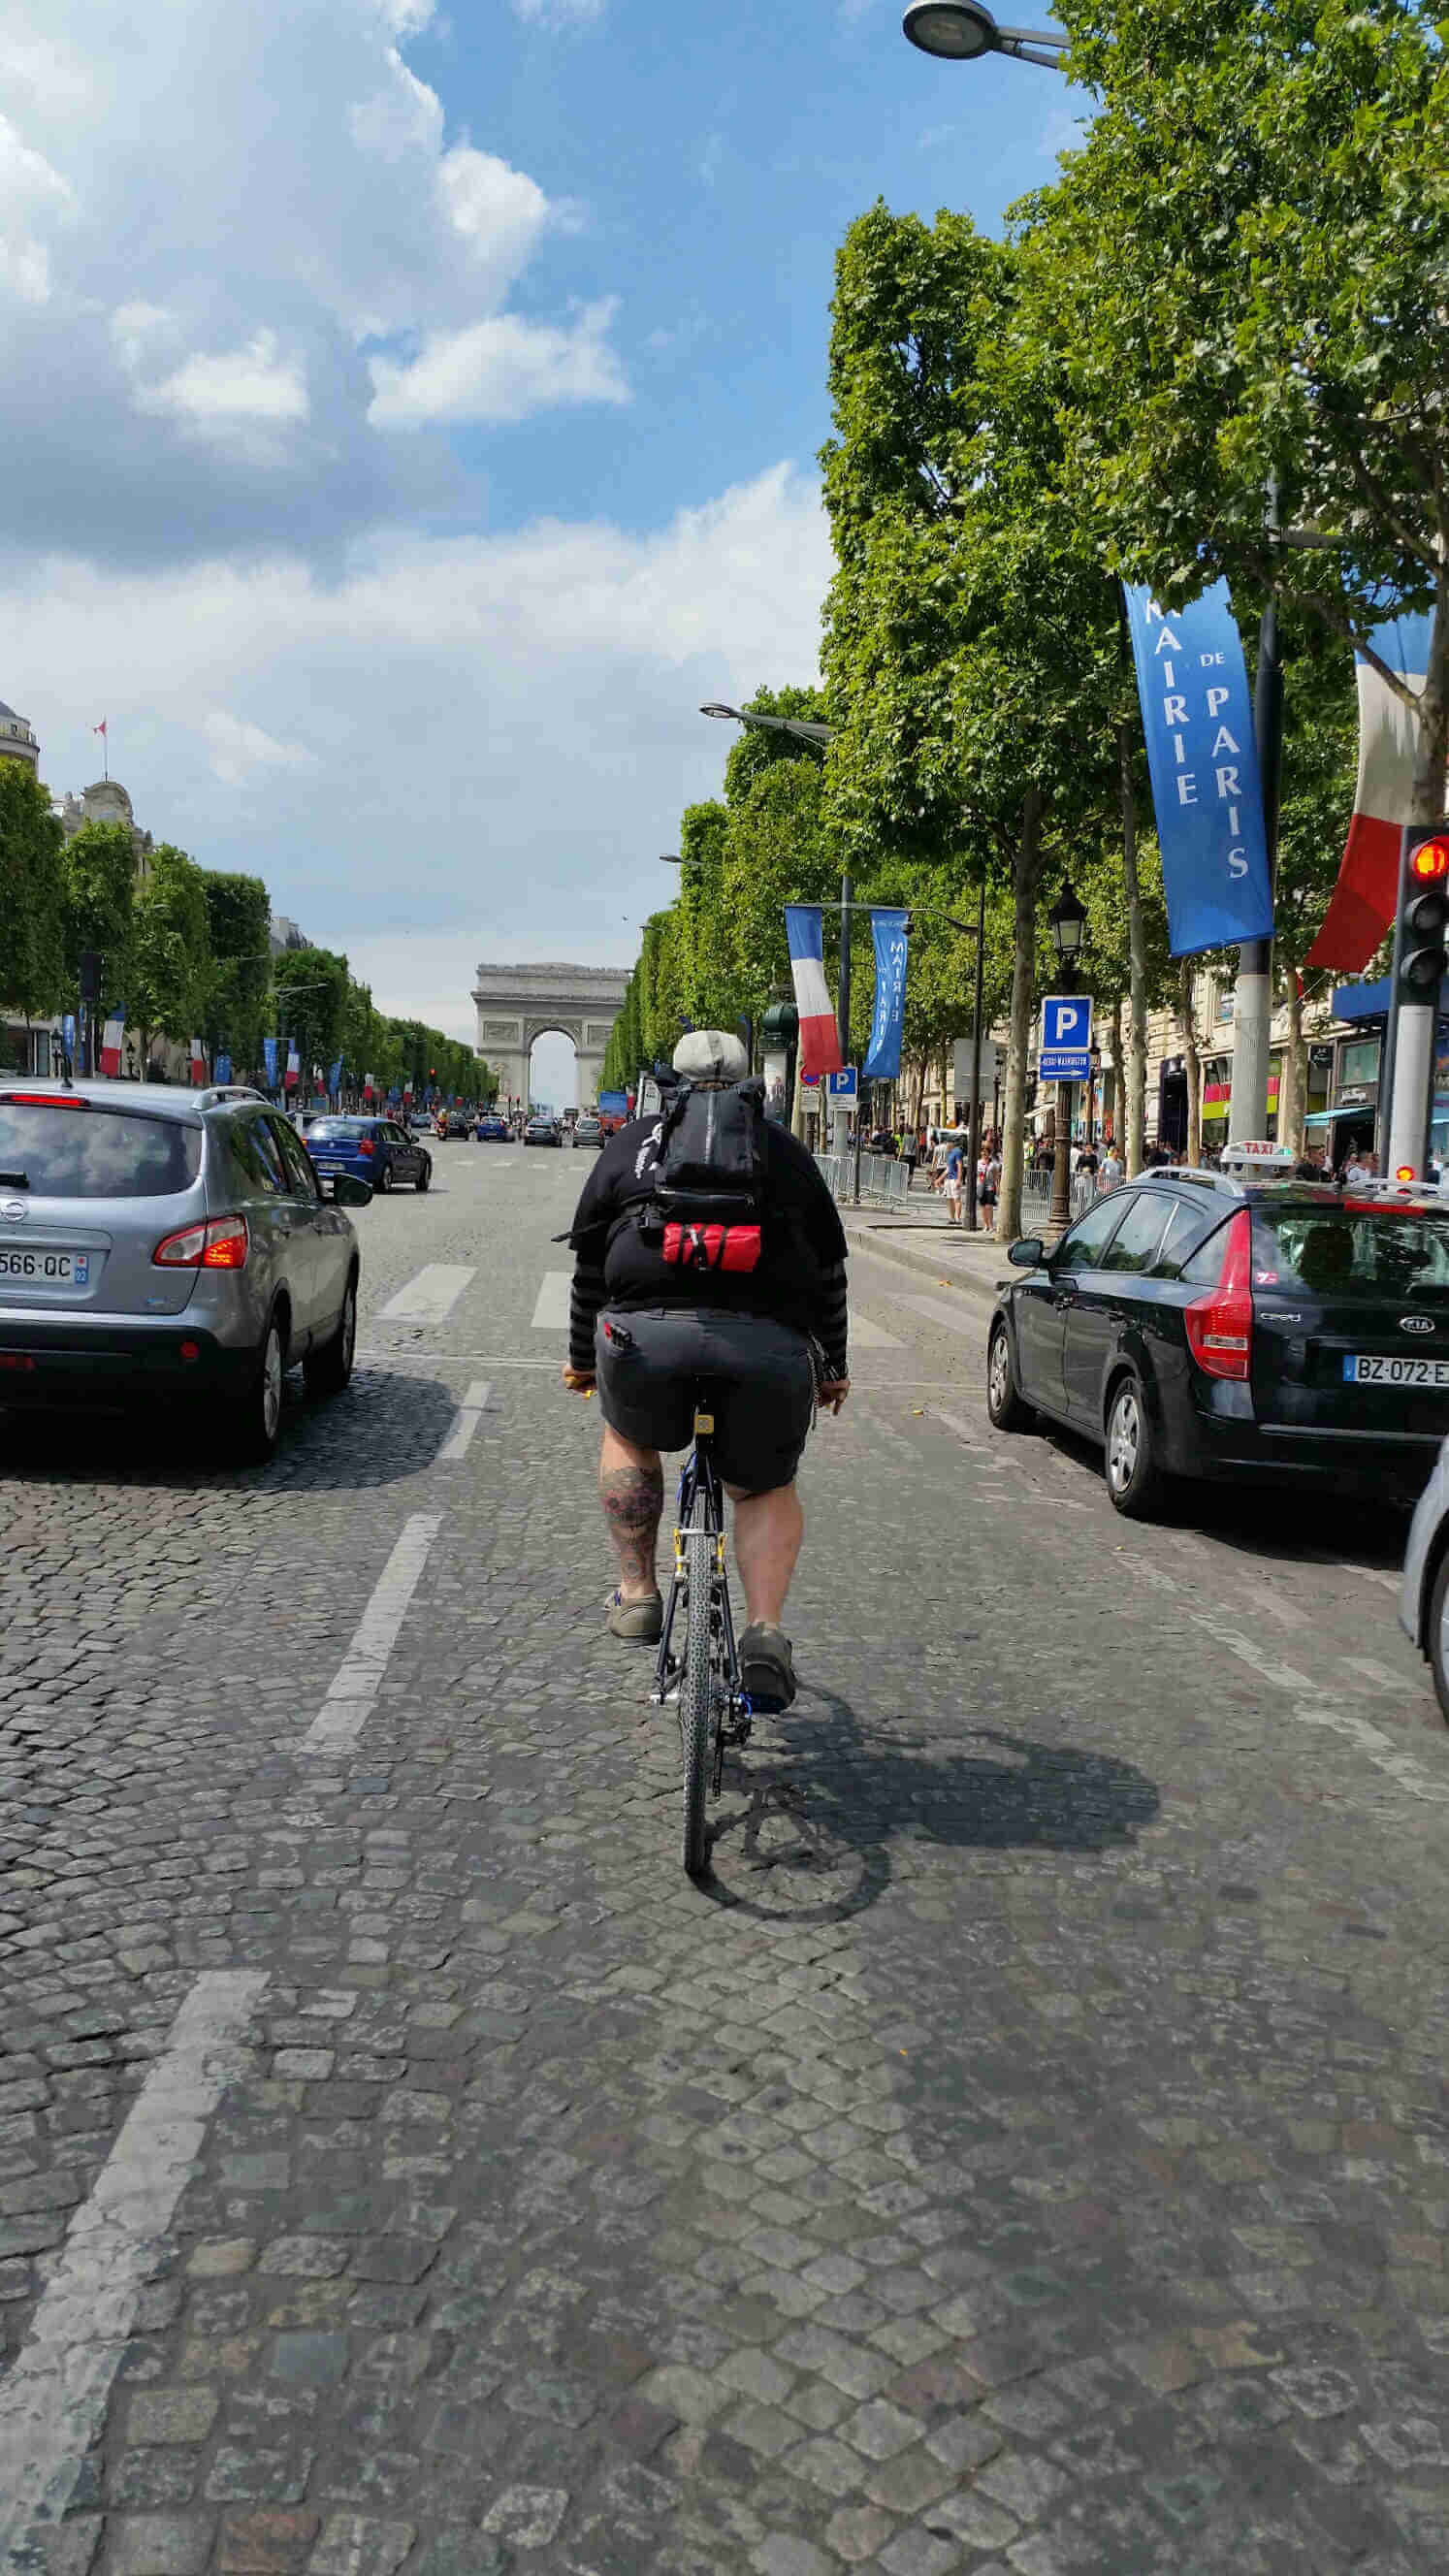 Rear view of a cyclist riding their bike on a street with cars, towards the Arc de Triomphe in Paris